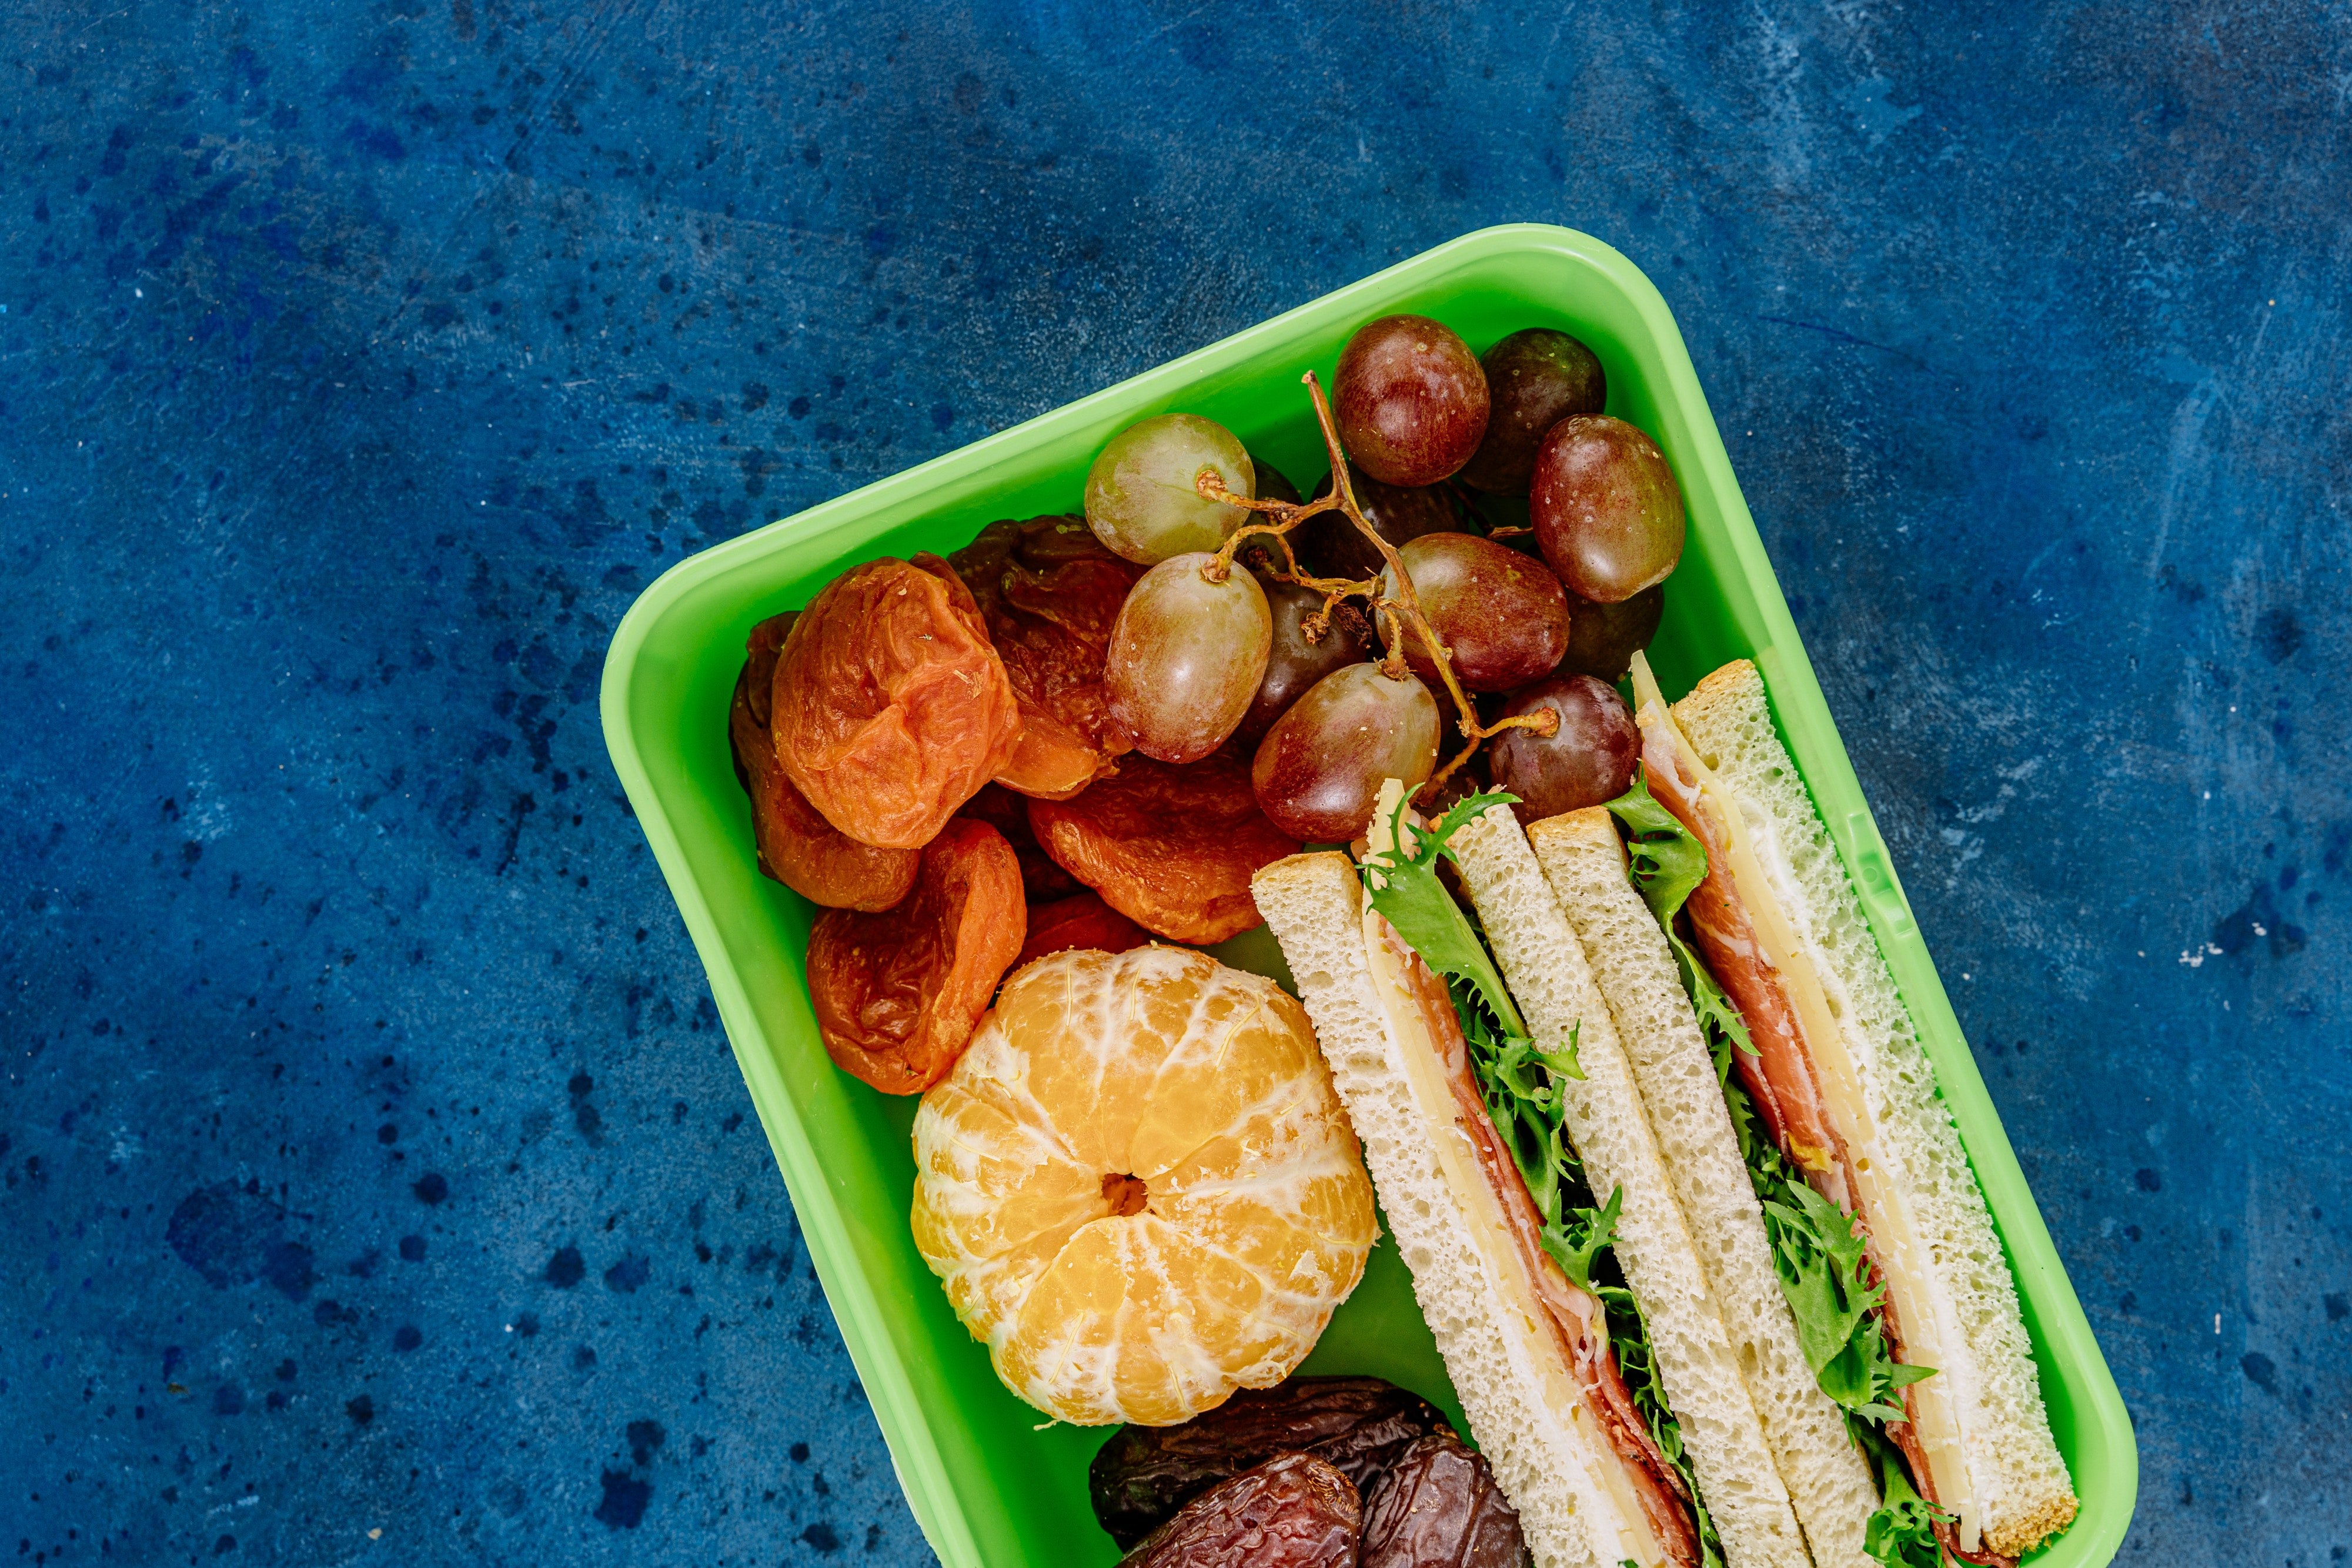 Stuart was startled to find a sandwich & fruits in his lunchbox. | Source: Pexels